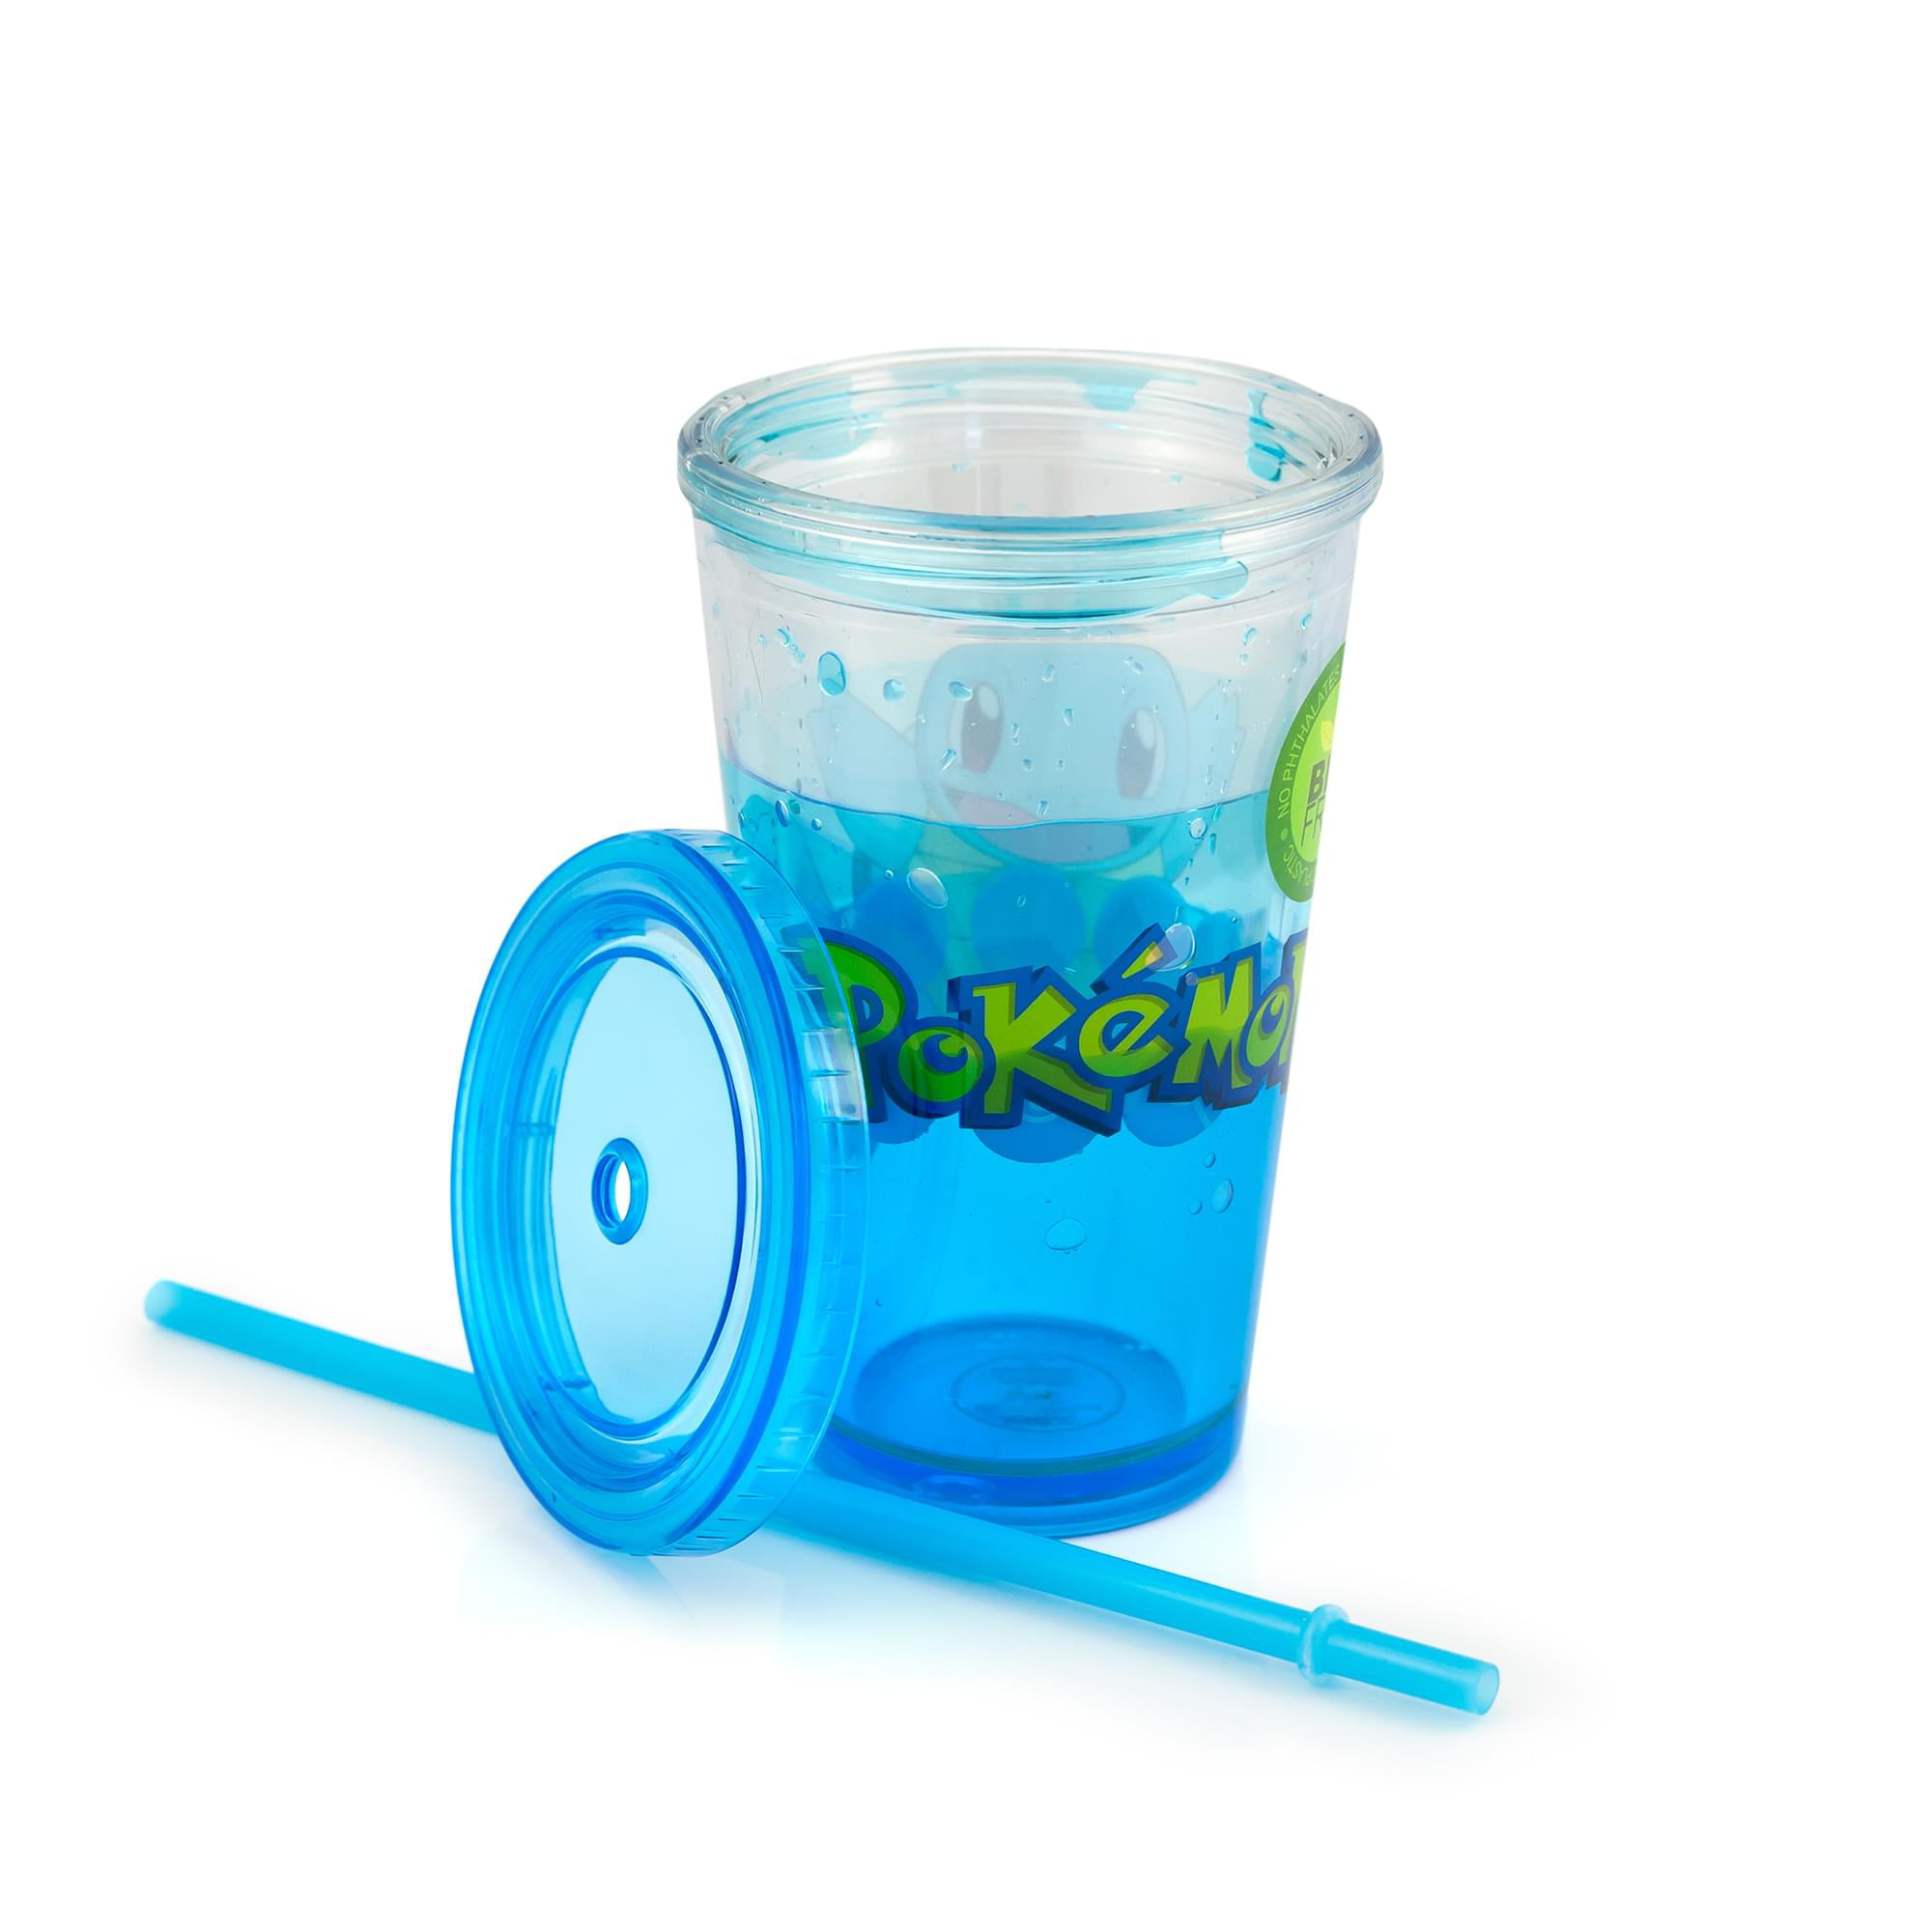 JUST FUNKY Pokemon Squirtle 16oz Plastic Carnival Cup Tumbler with Lid and  Reusable Straw